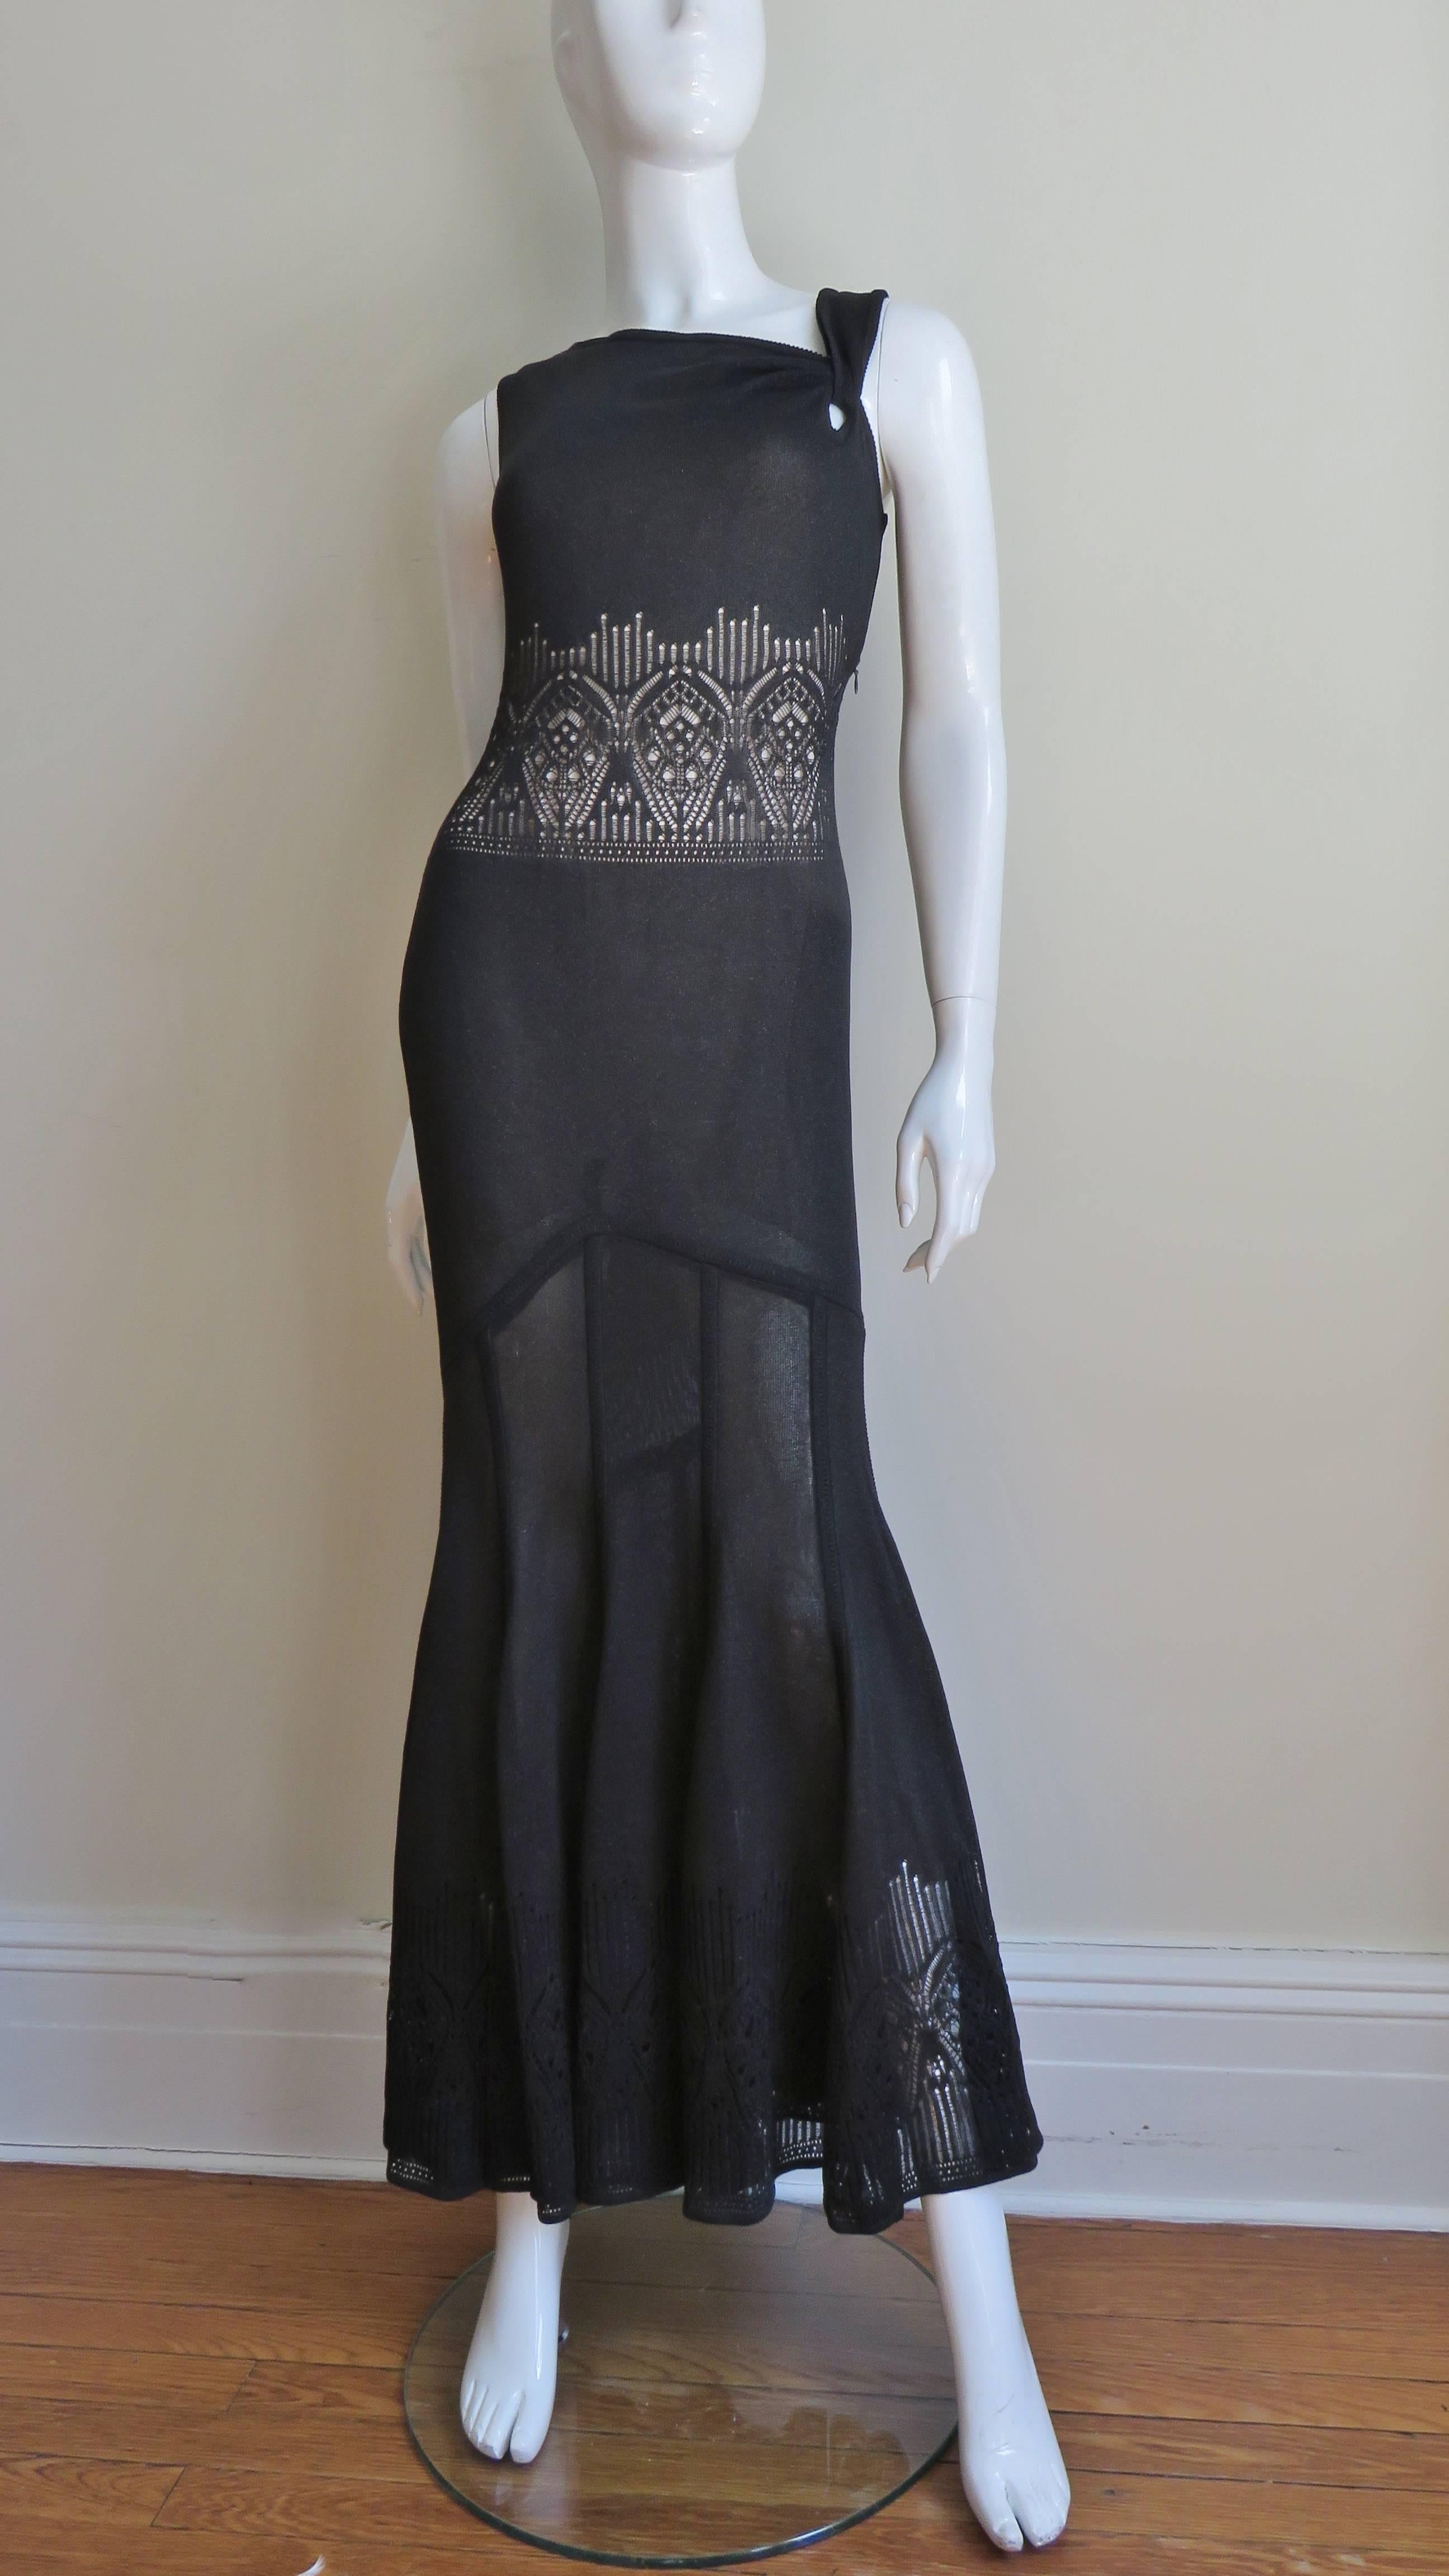 A fabulous black knit dress from John Galliano.  It has an asymmetric angled neckline and semi sheer abstract pattern lace around the midriff and hem. Fitted through the thighs with an inverted V in the center front it has a vertically seamed semi